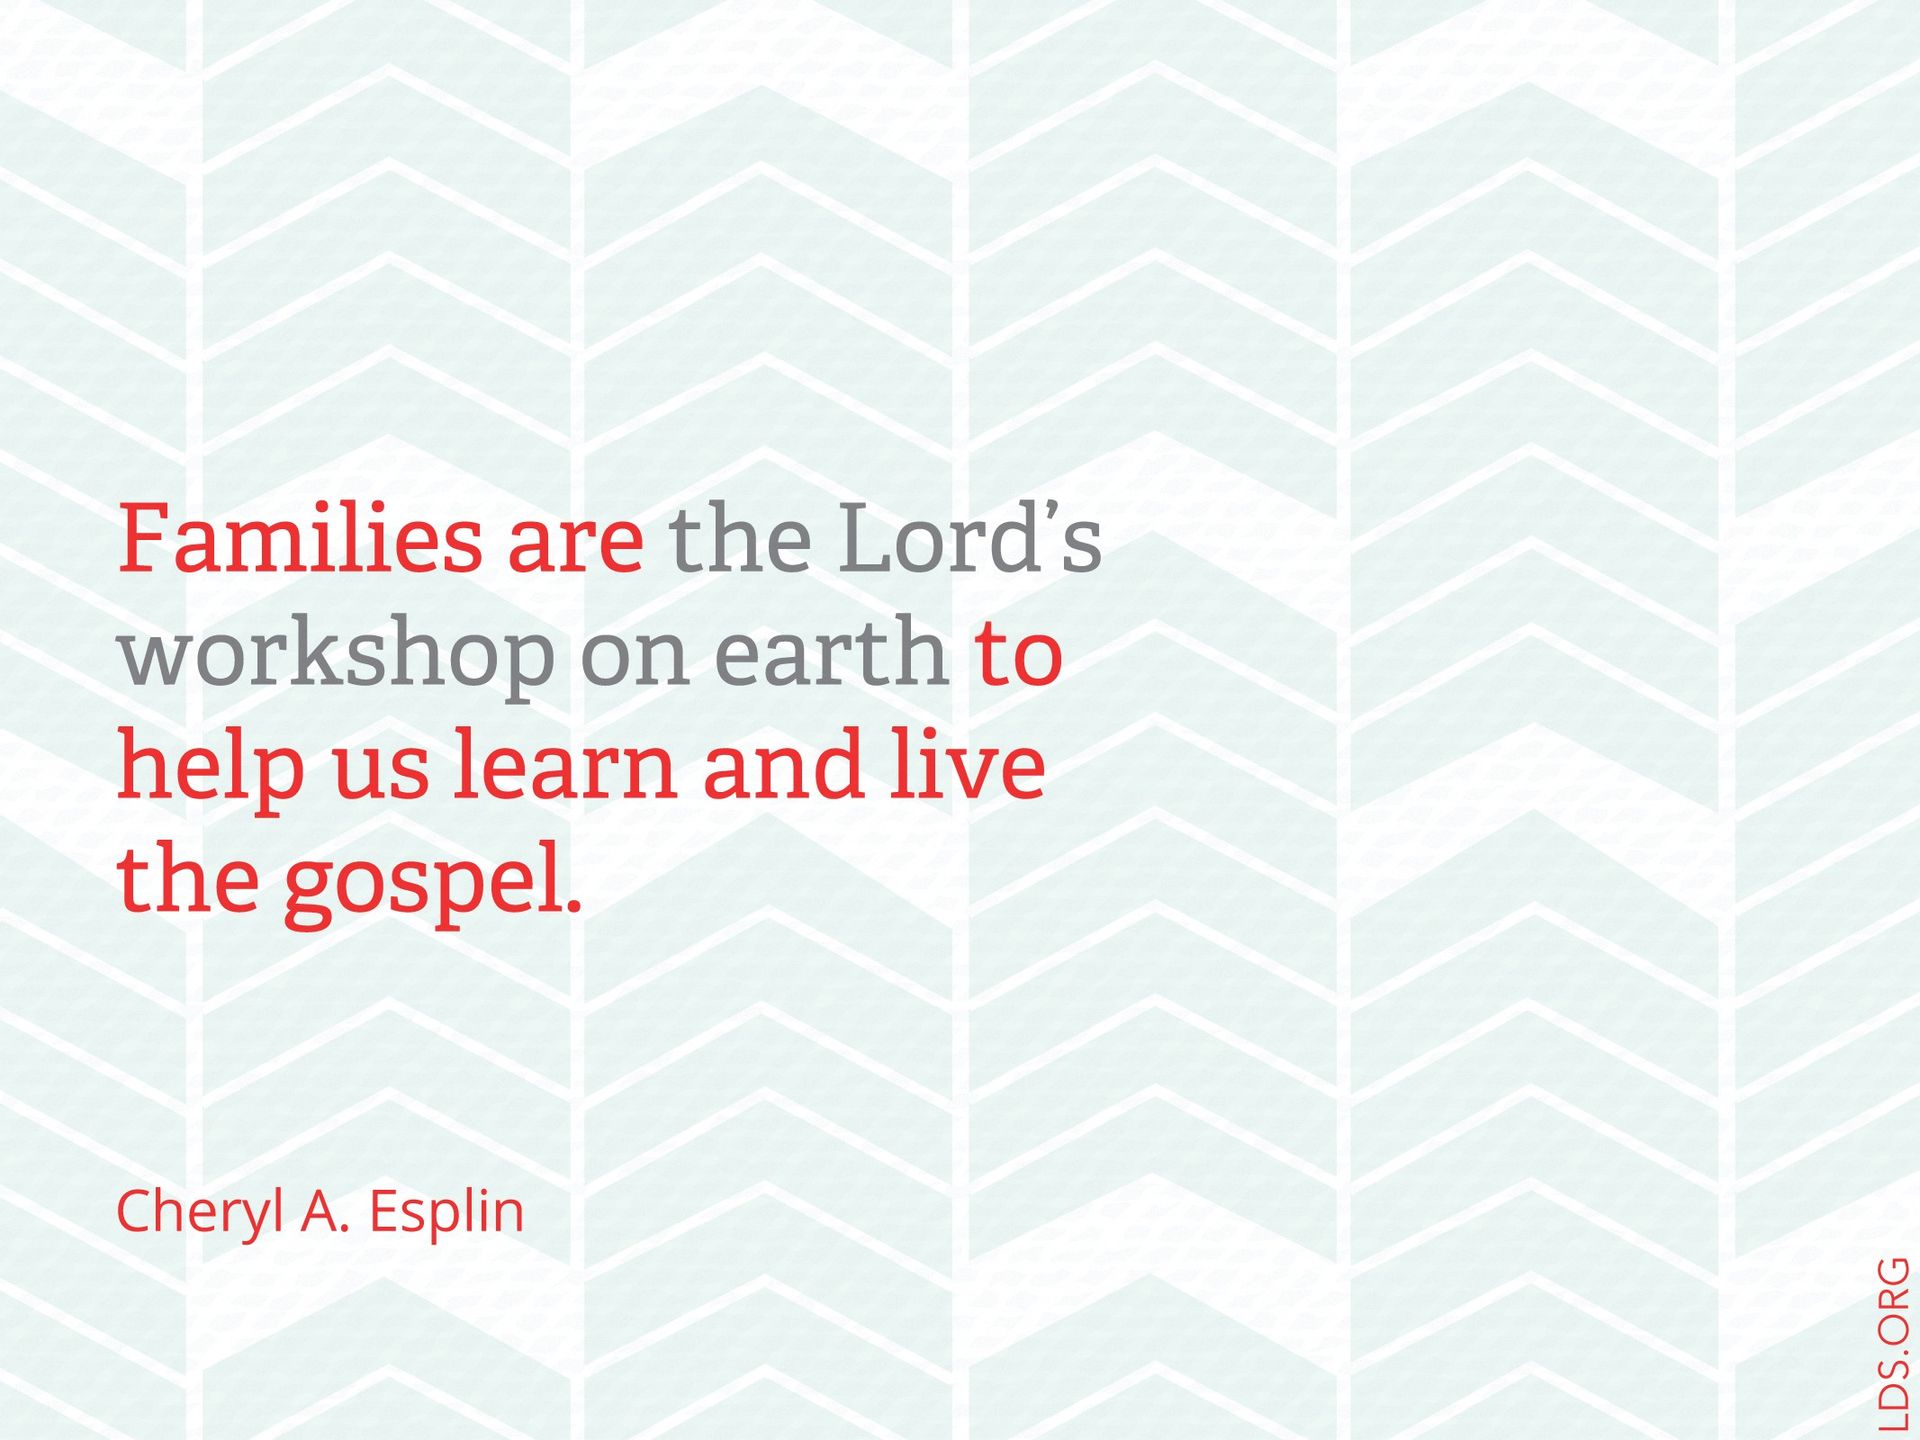 “Families are the Lord’s workshop on earth to help us learn and live the gospel.” —Cheryl A. Esplin, “Filling Our Homes with Light and Truth”